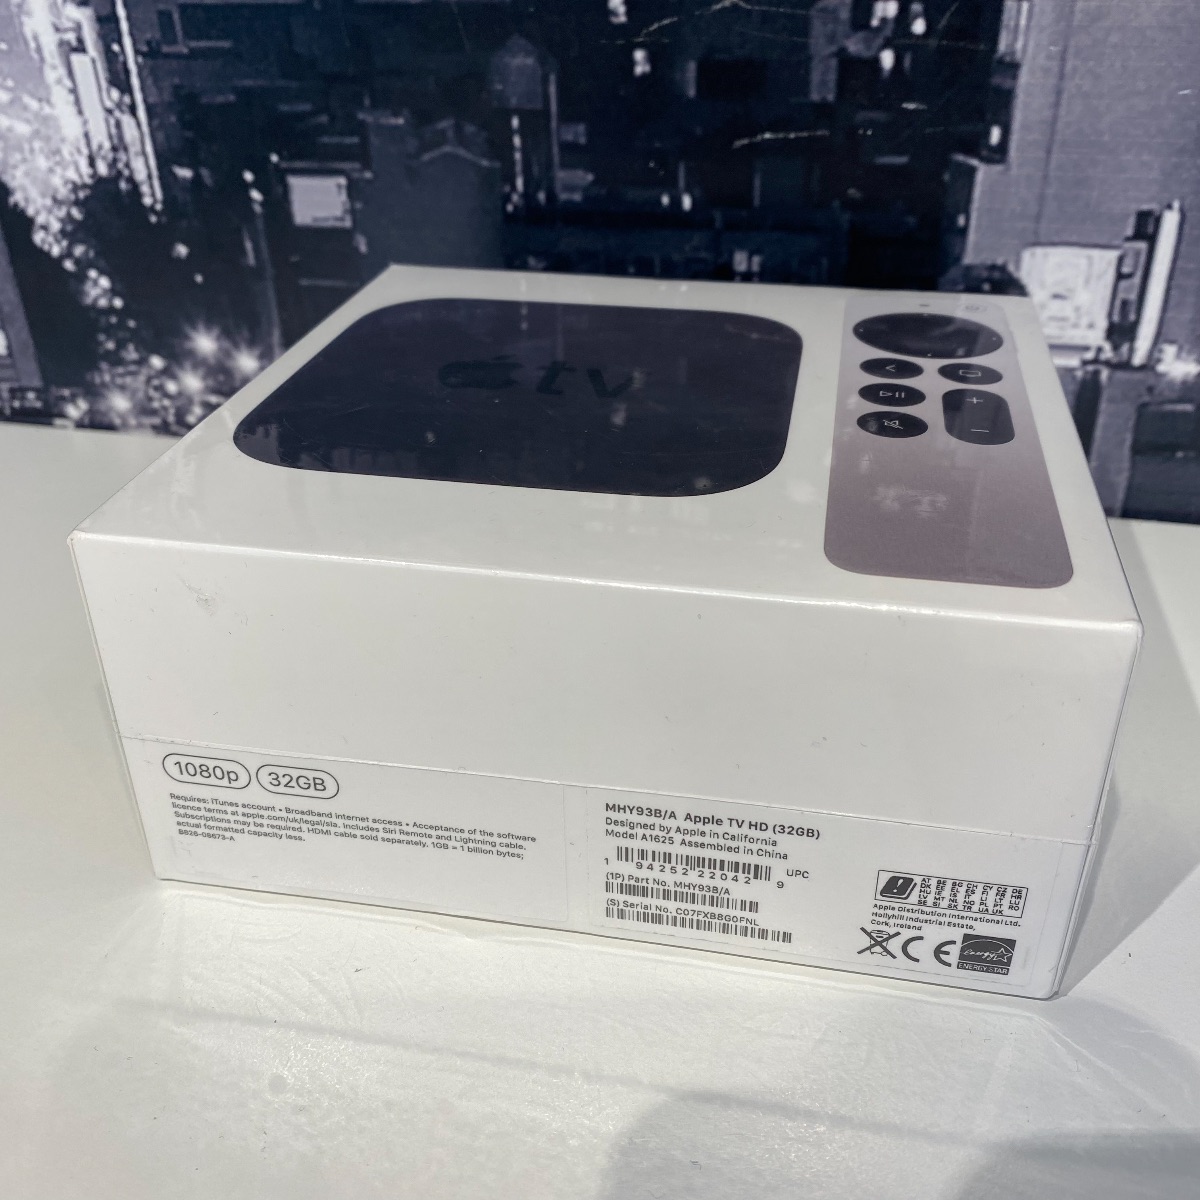 Apple TV HD 32GB with White Remote Smart TV ITunes Siri 100% Genuine Sealed 2021 MHY93B/A 194252220429 (Brand New & Sealed)